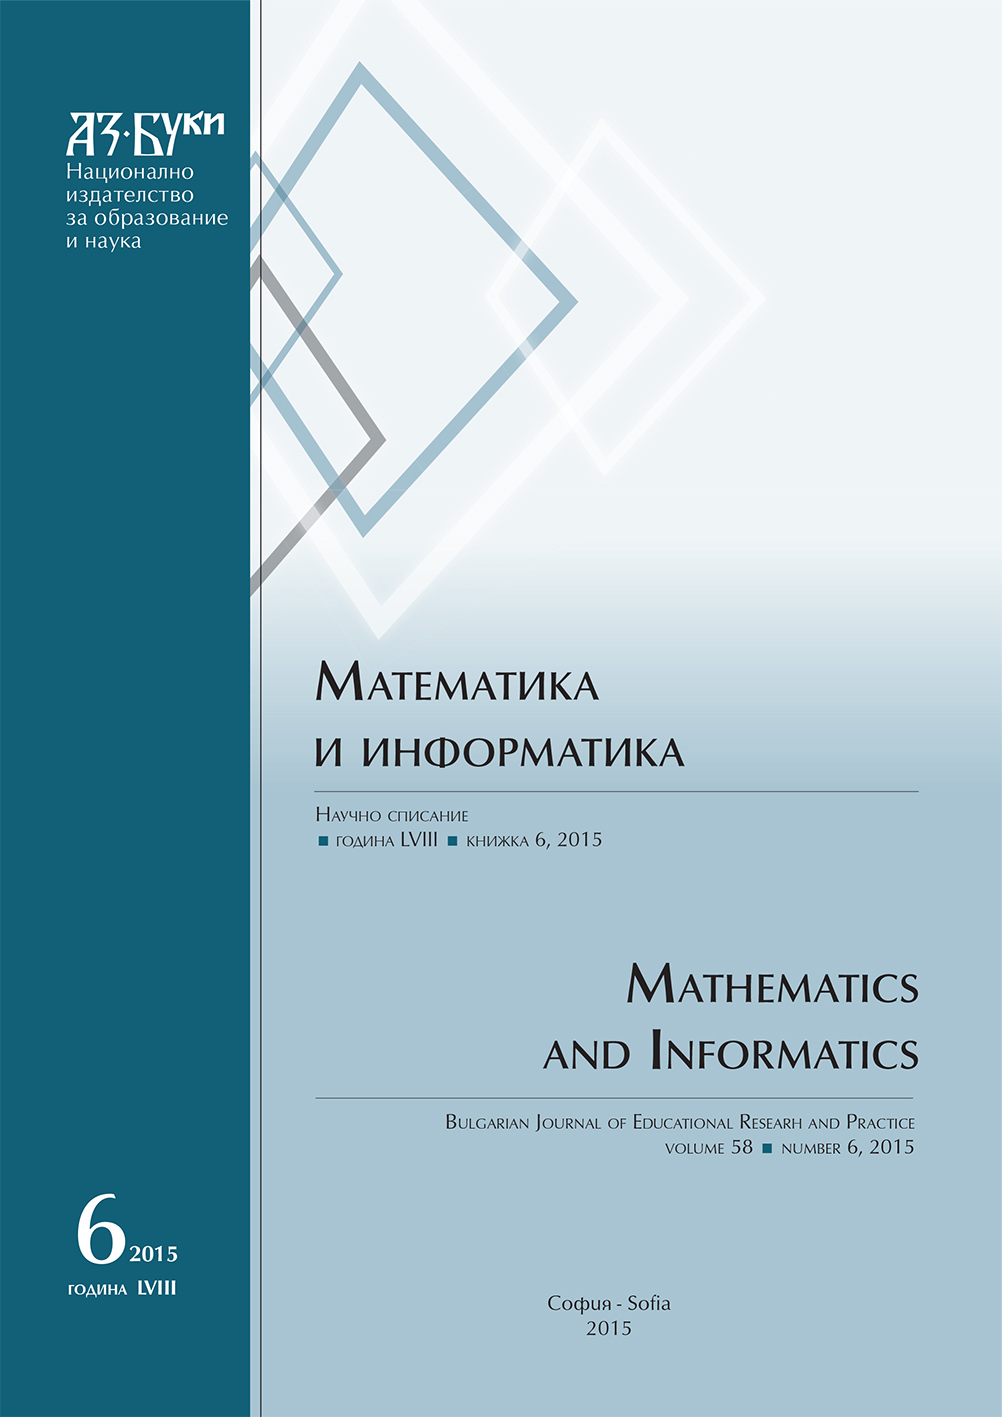 Historical Prerequisites for Finger Math and the Mathematics Education of
Students with Special Educational Needs Cover Image